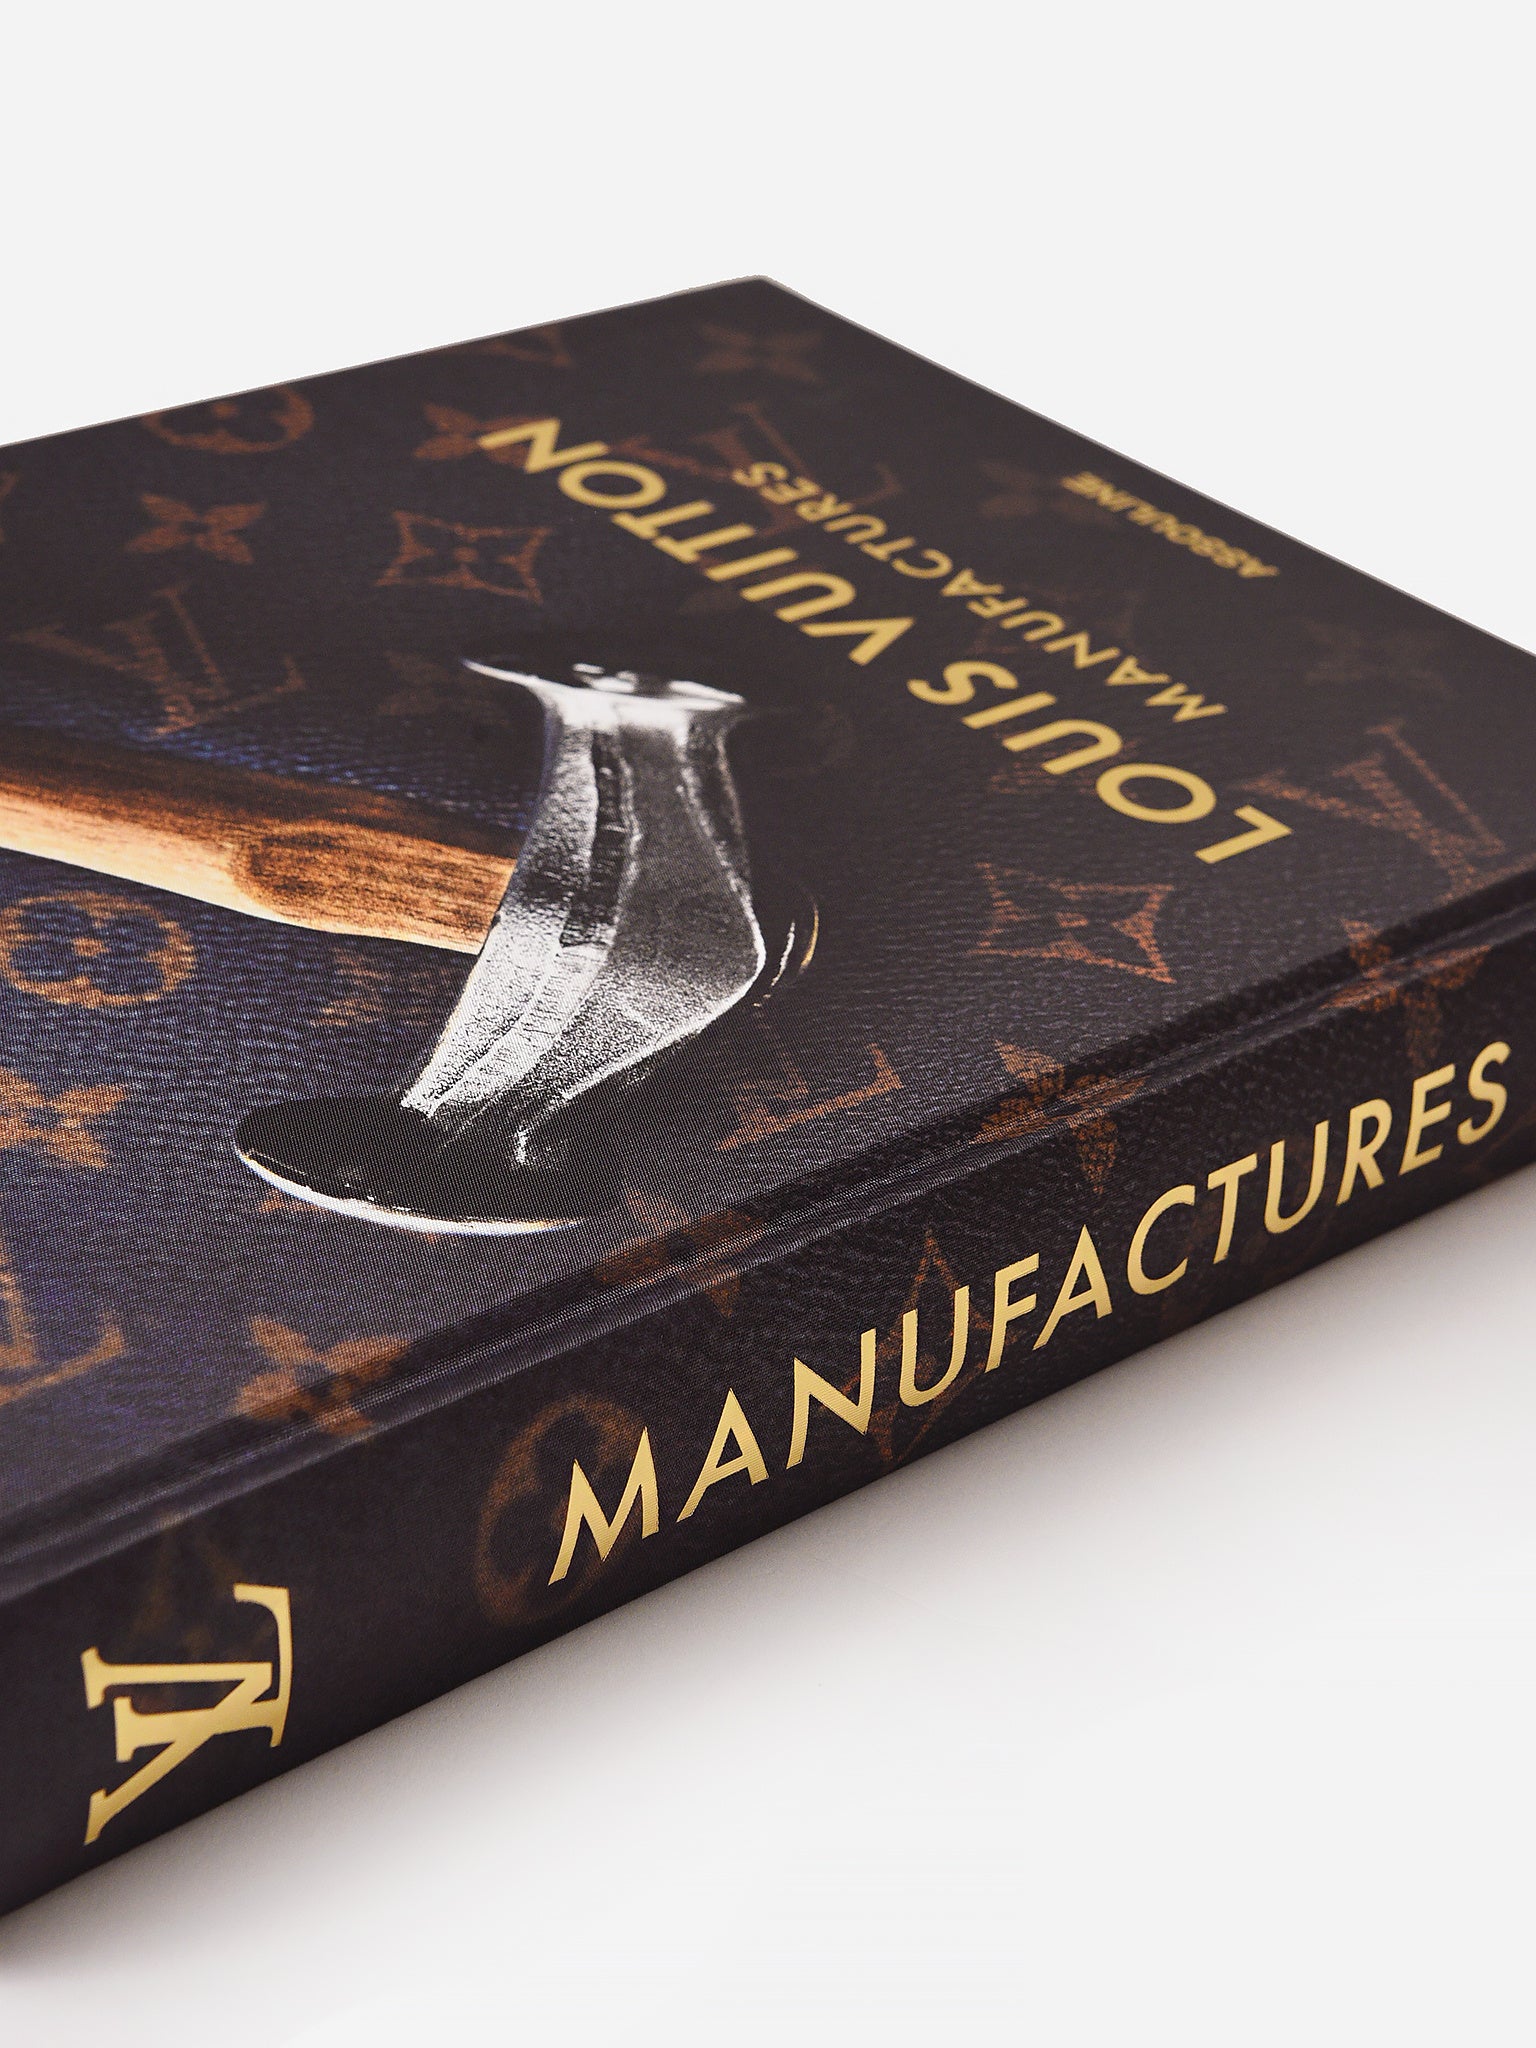 Book - Louis Vuitton Manufactures - By Assouline